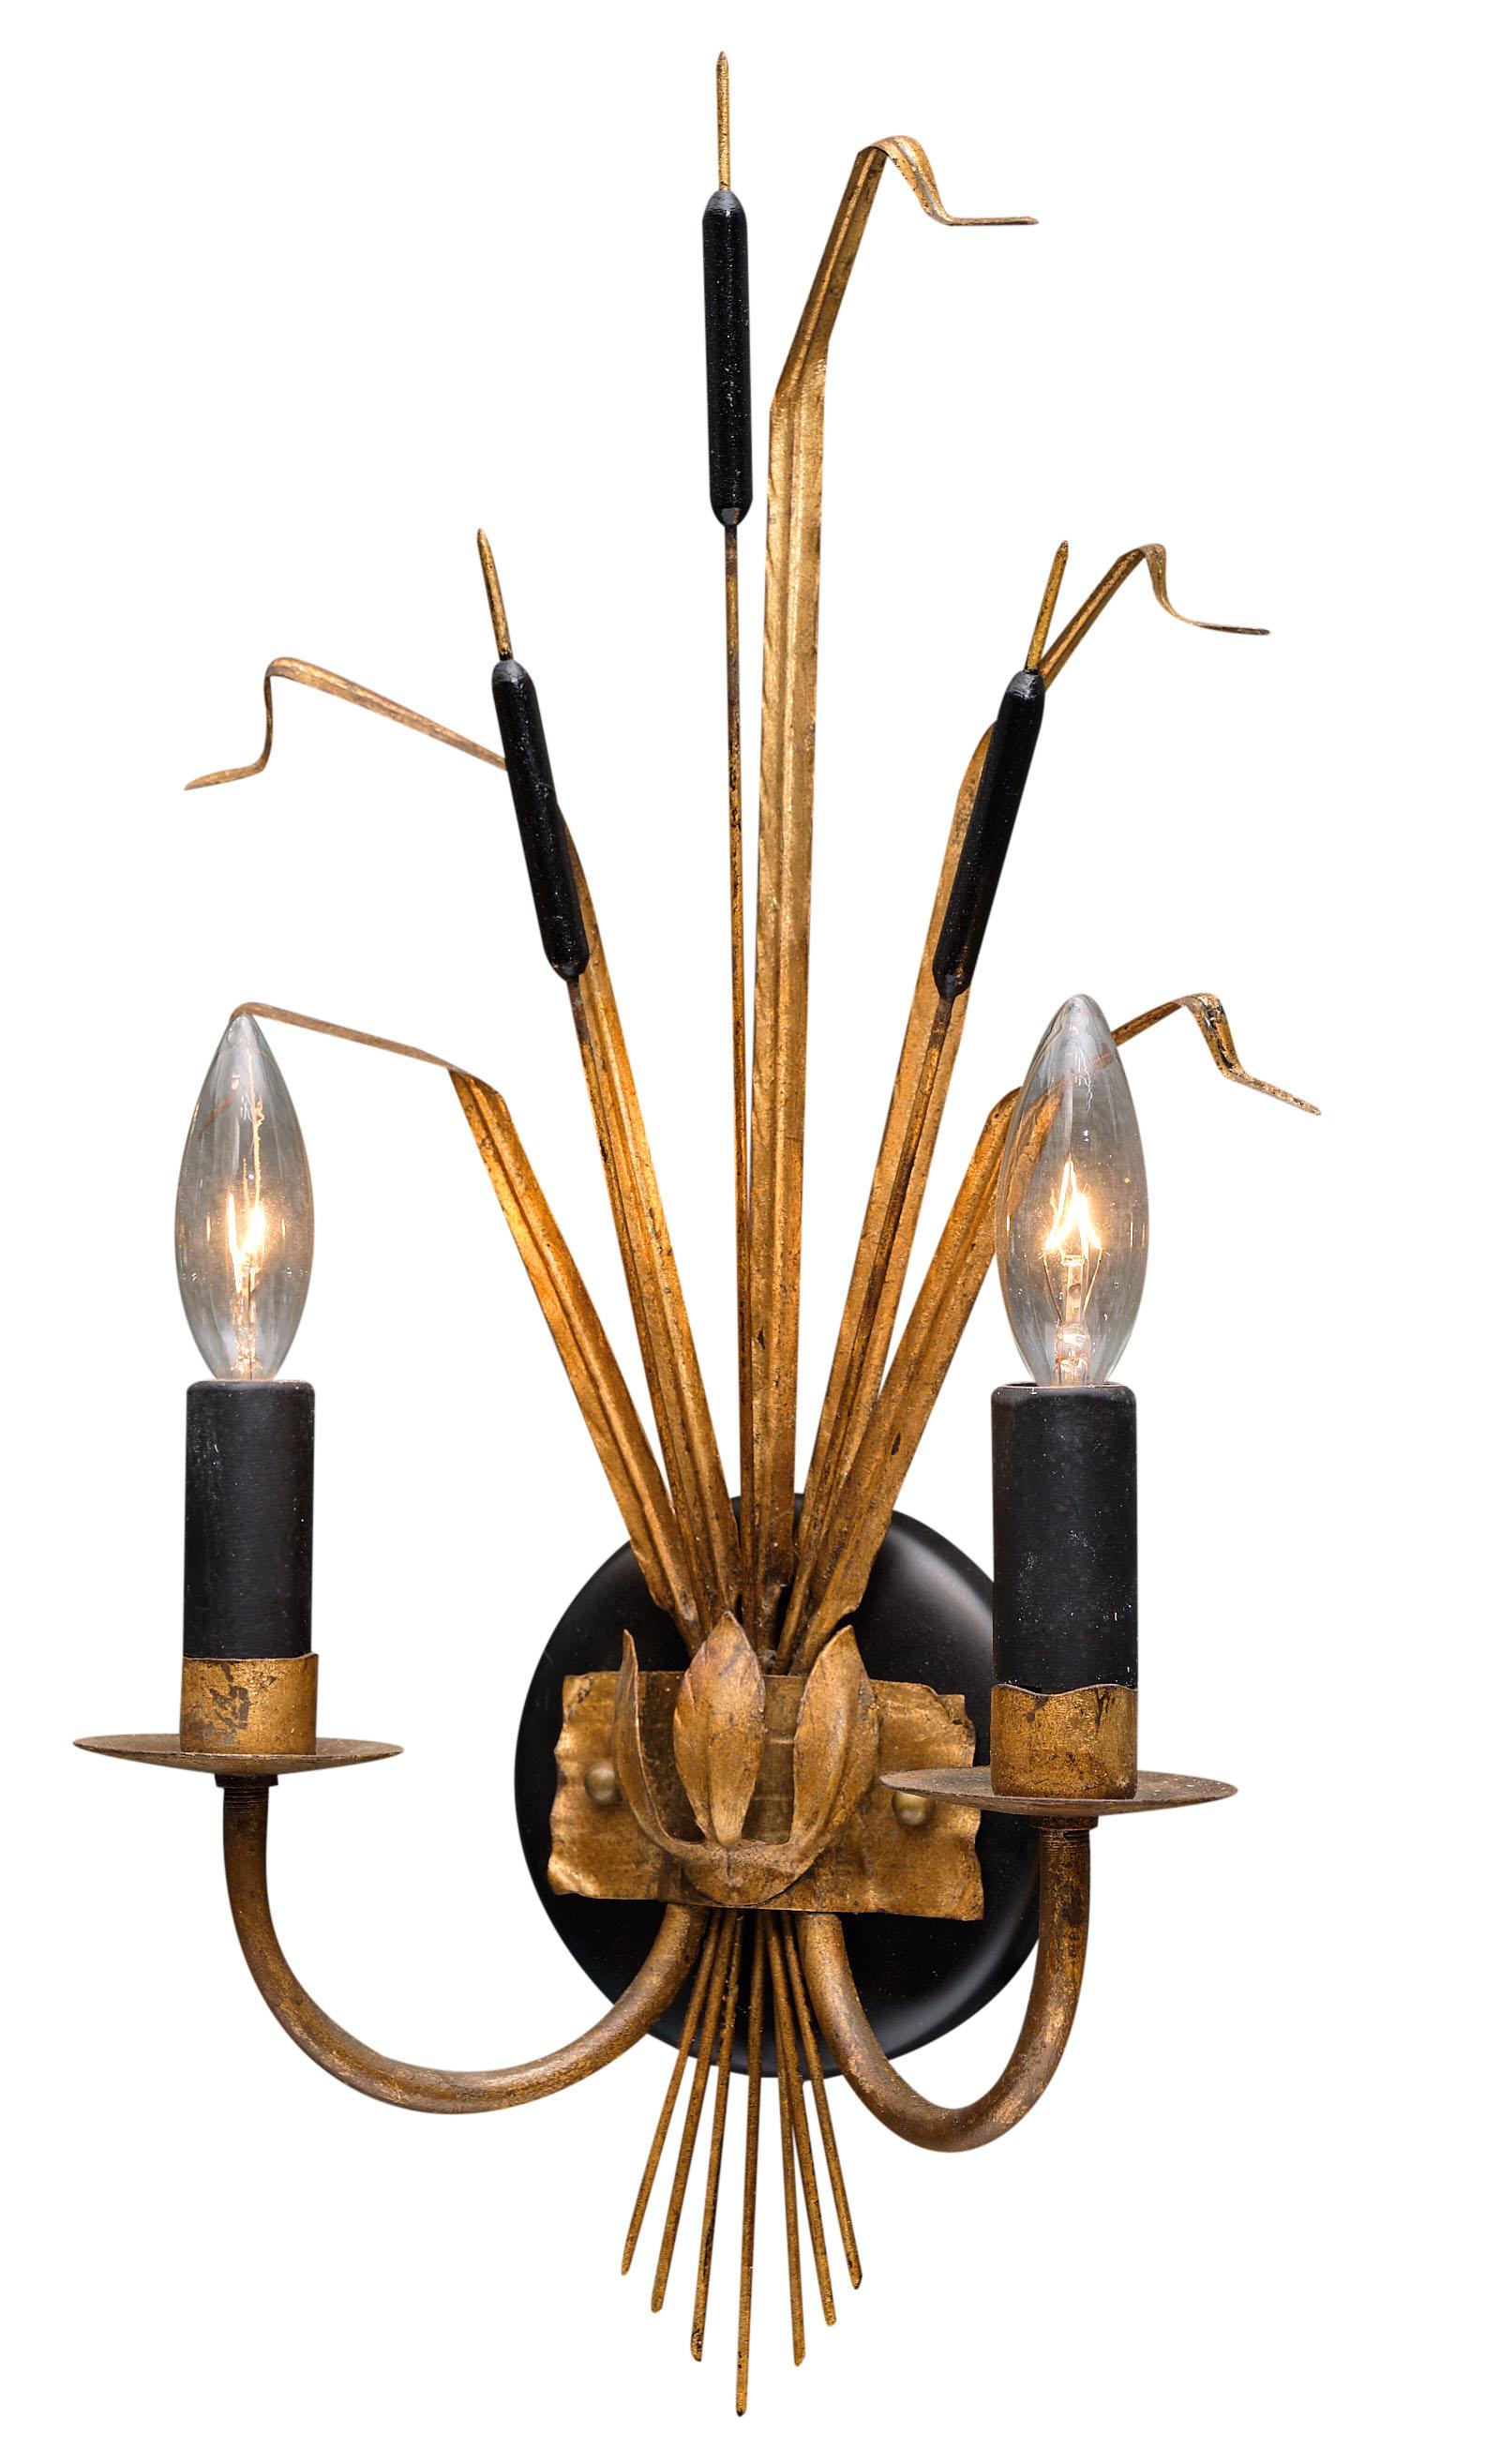 Pair of vintage French sheaf of wheat sconces by Maison Baguès. We love the gilt tole pair with black accents. They have been newly wired to fit US standards.